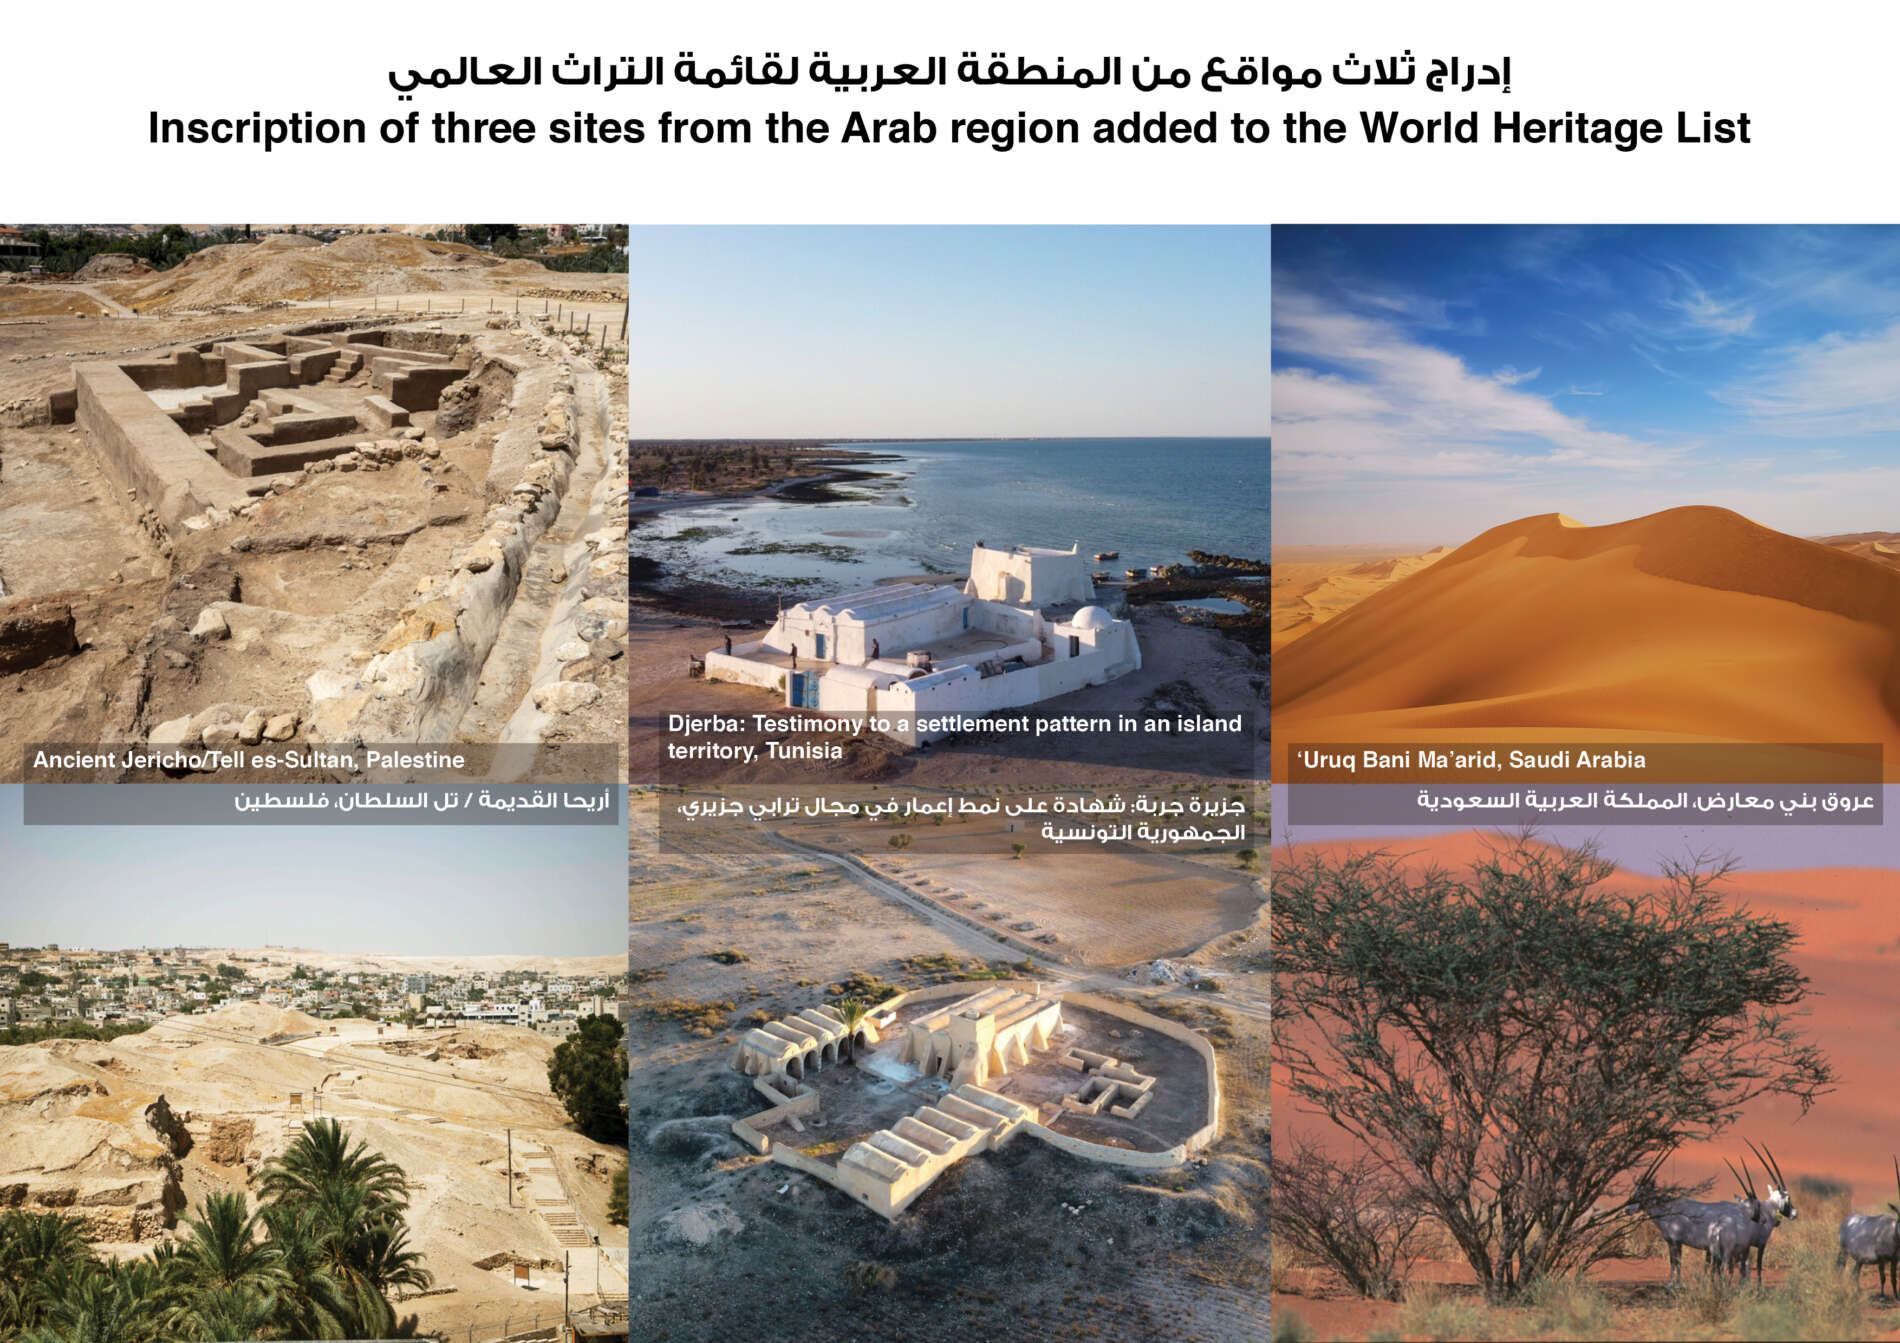 Three news sites inscribed on the World Heritage List in the Arab region